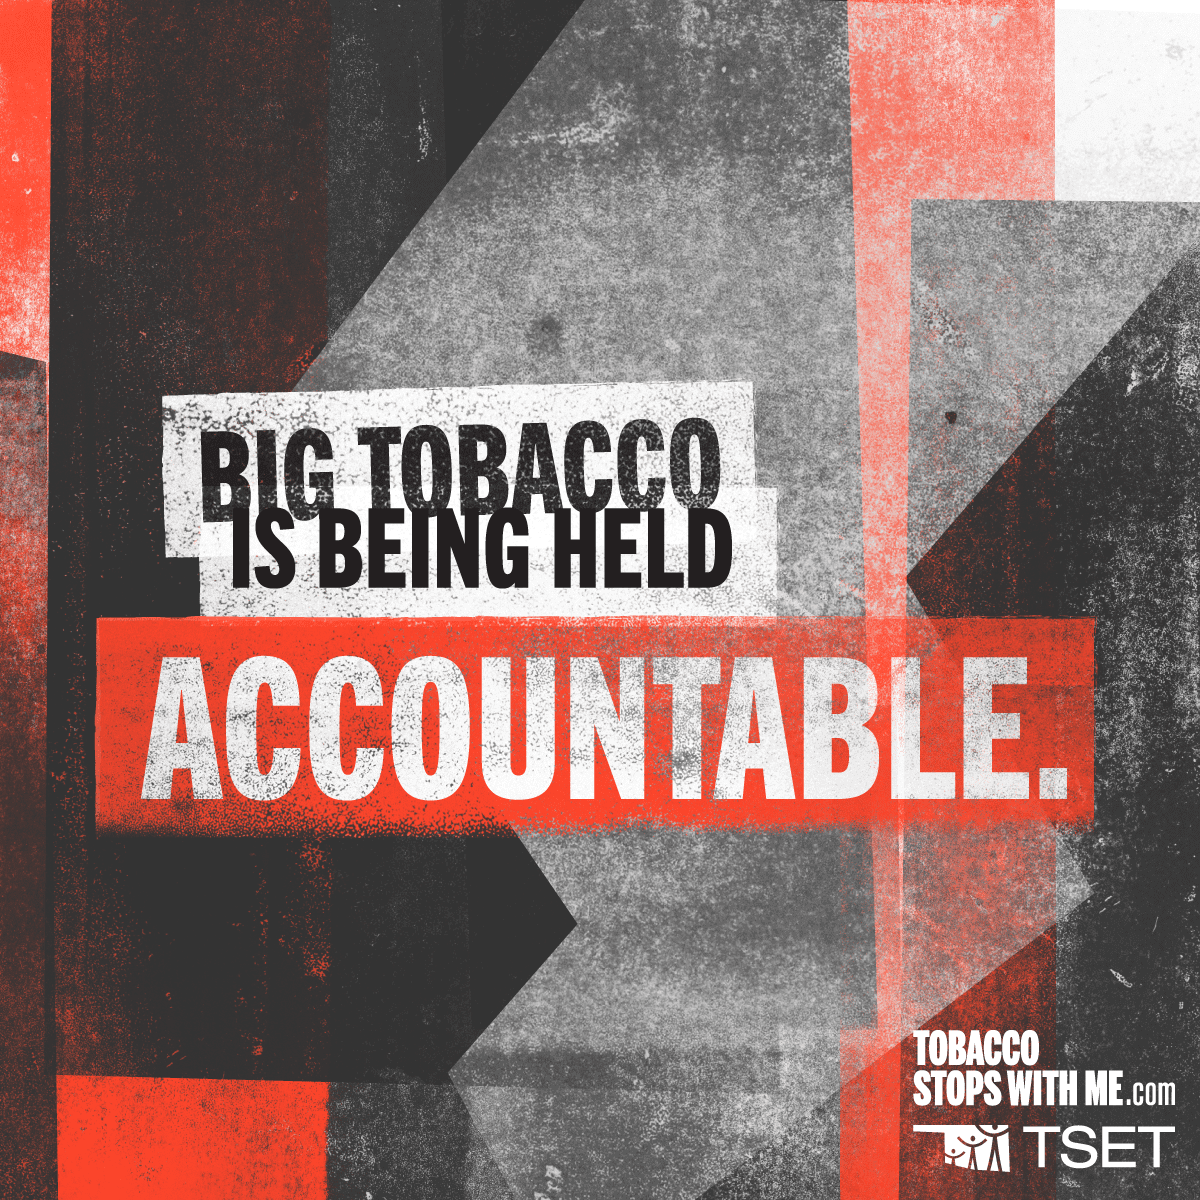 Big tobacco is being held accountable